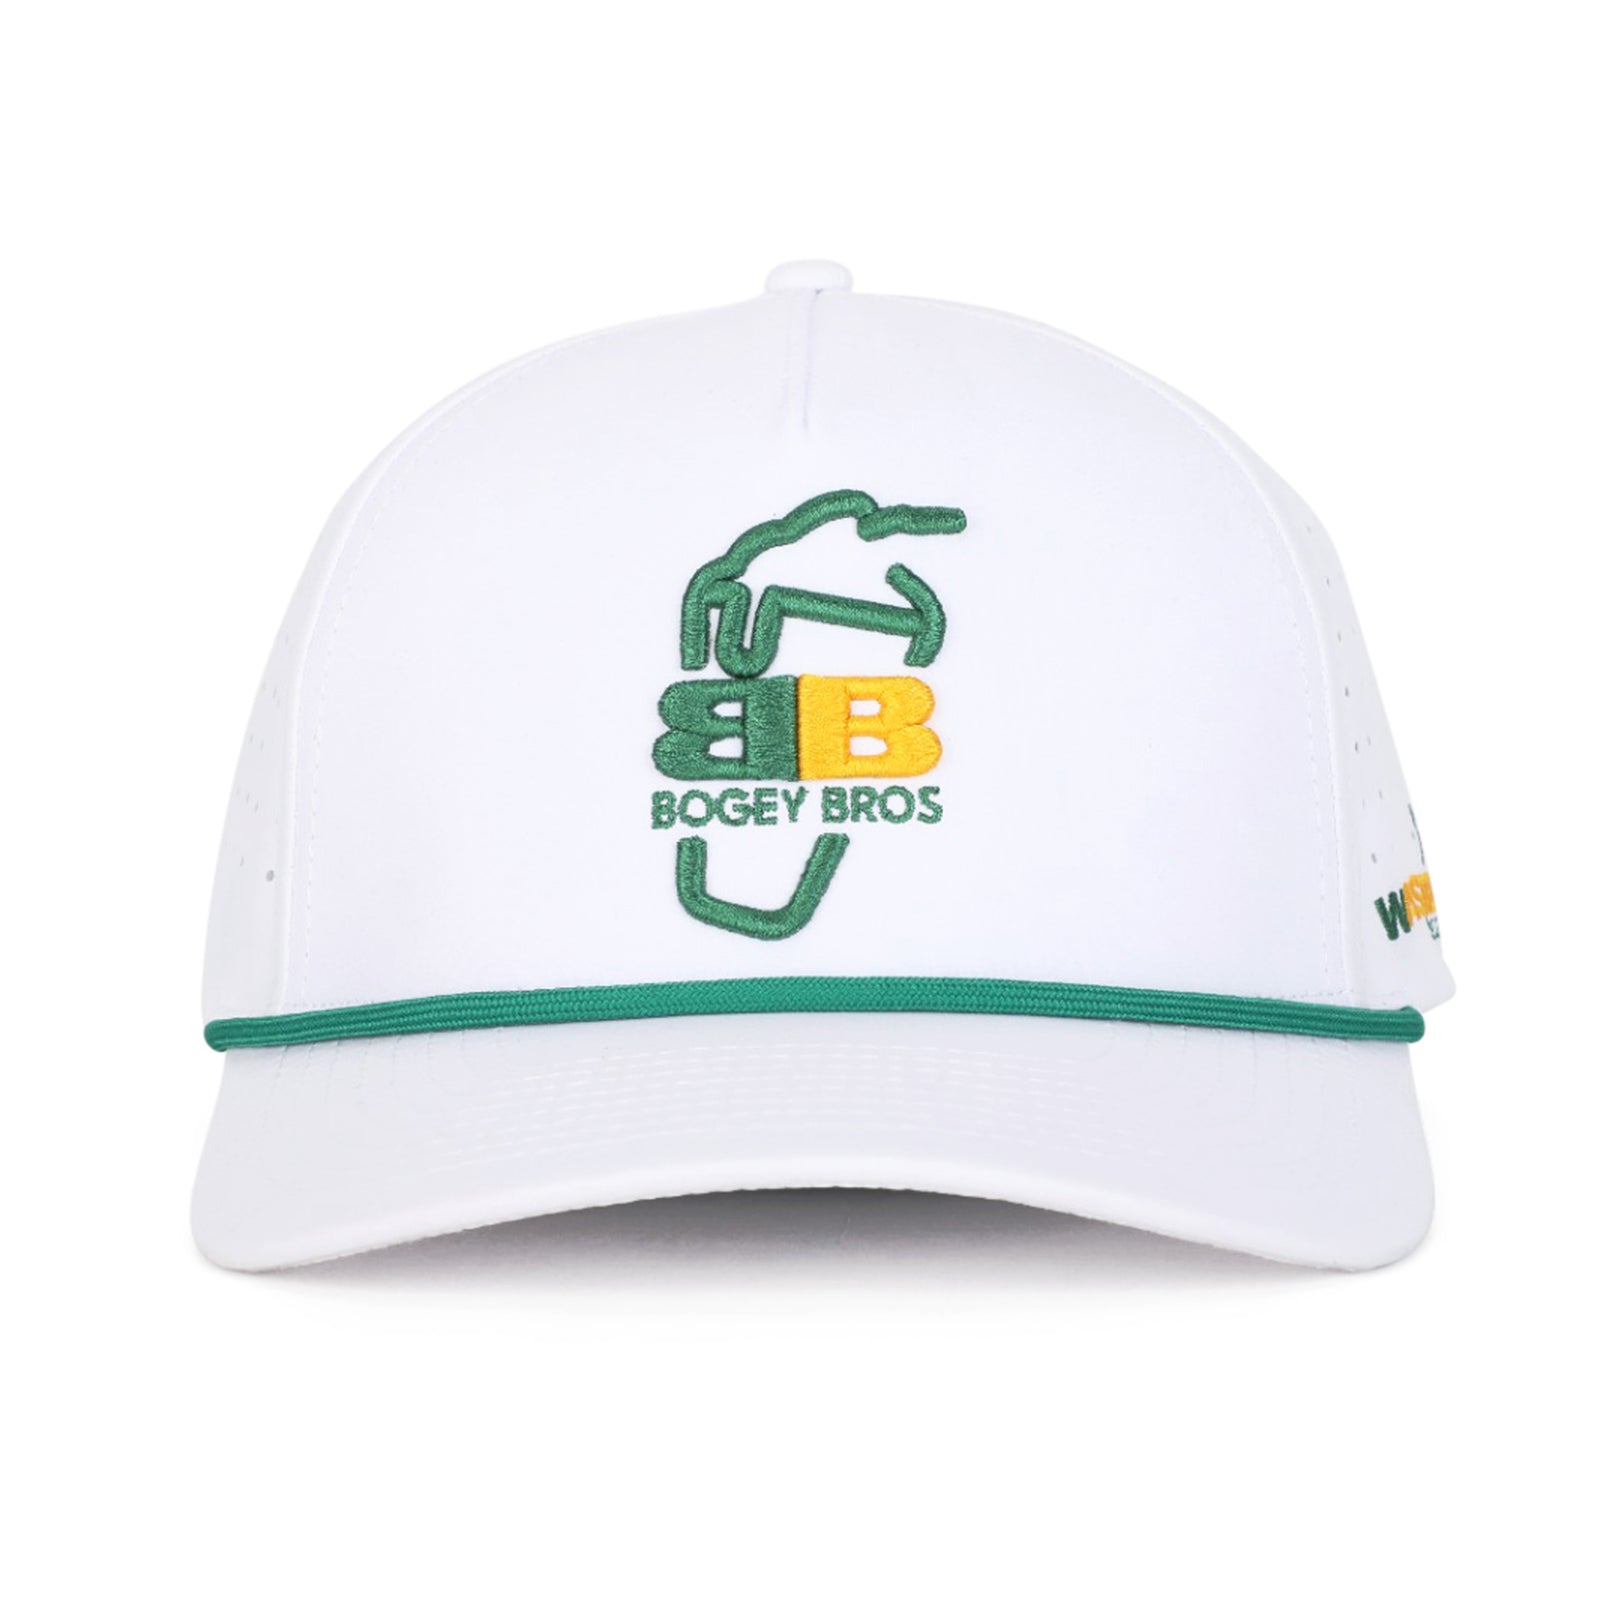 Wasted - Performance Golf Rope Hat - Snapback